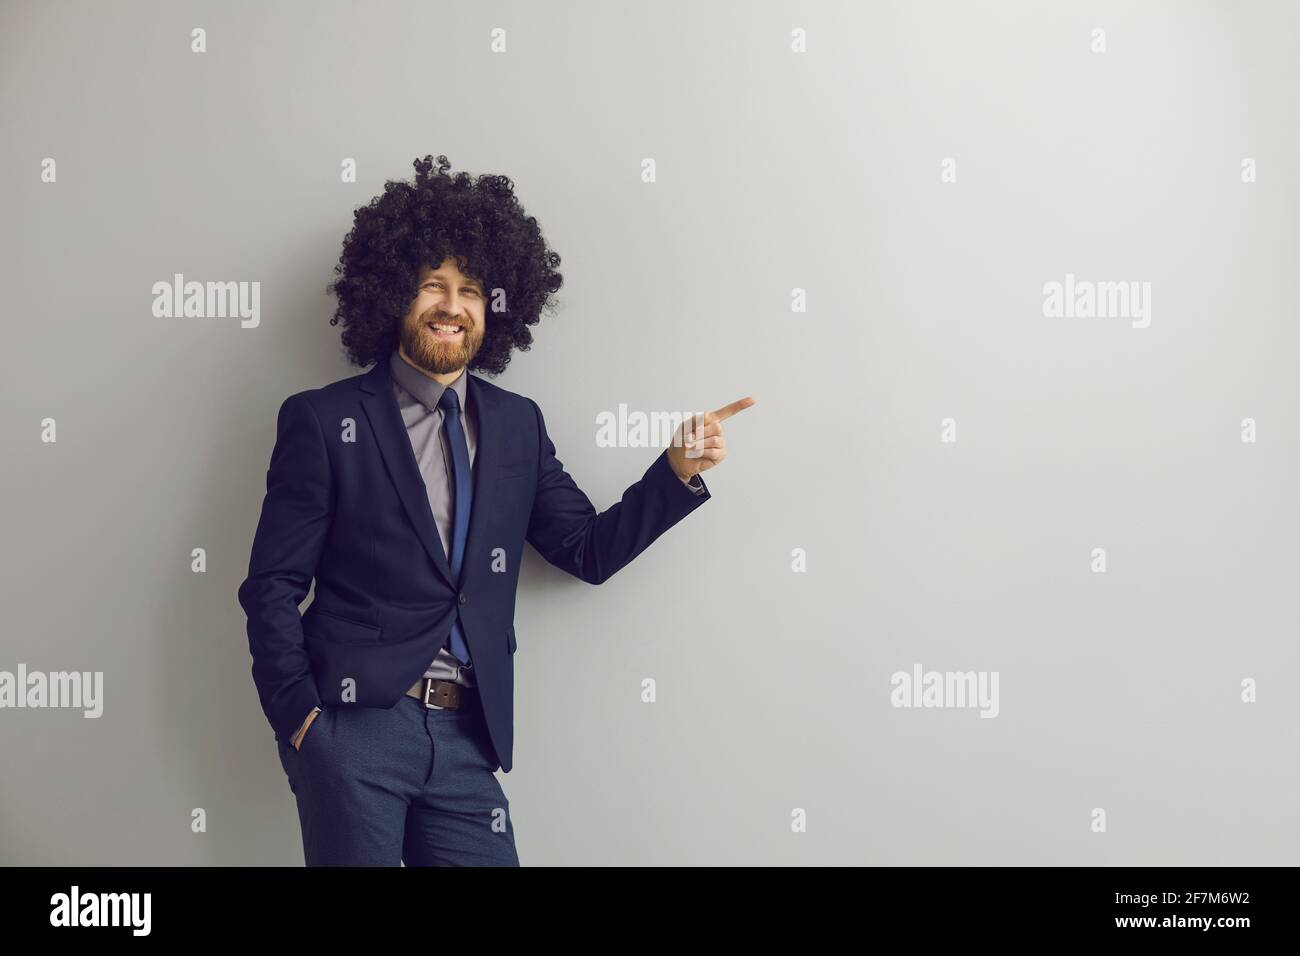 Loudly laughing business man in funny afro curly hair wig pointing at something Stock Photo